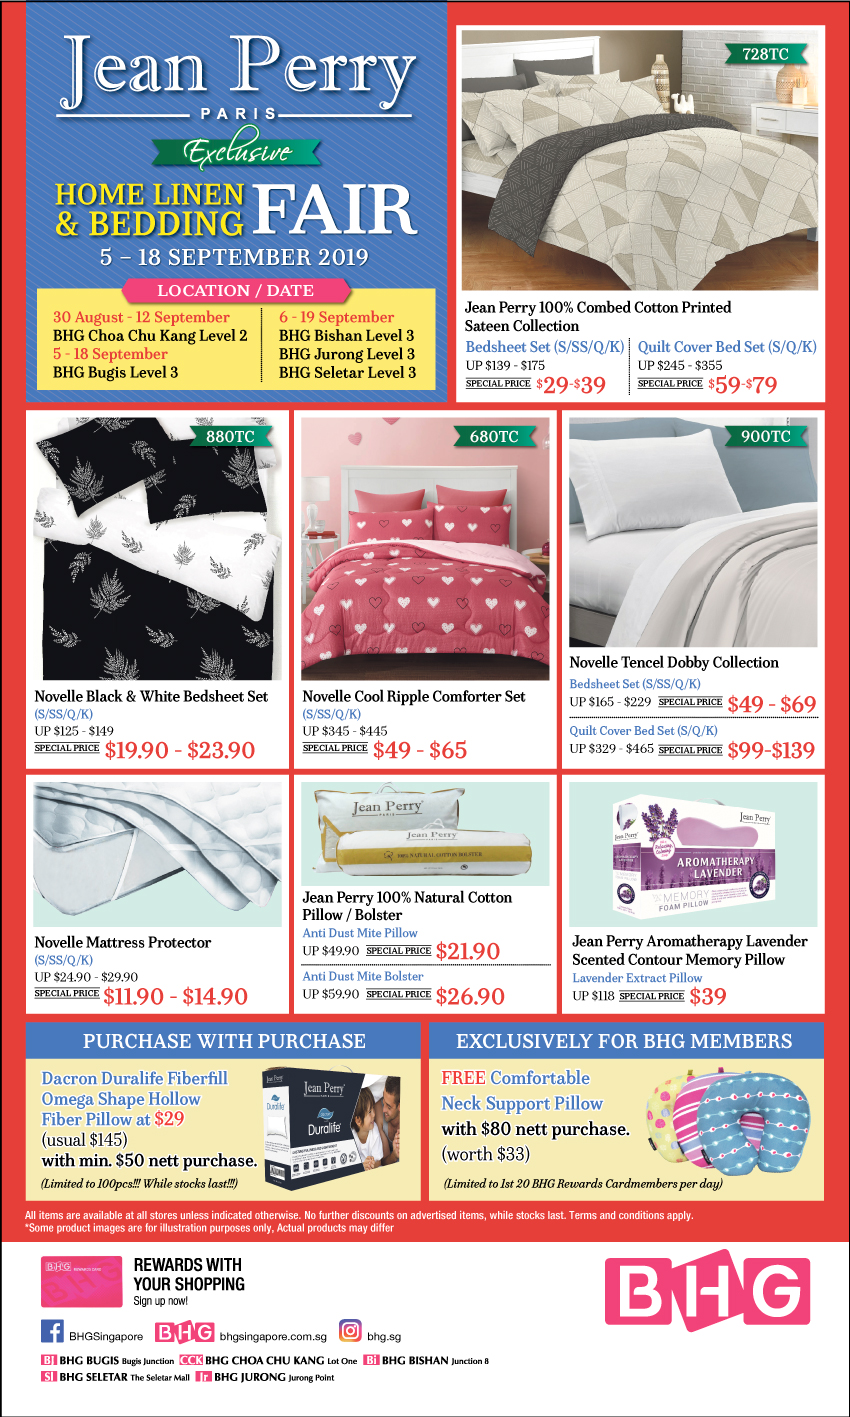 Massive Home Linen & Bedding Fair at BHG from 5 – 18 Sep 19 - 1